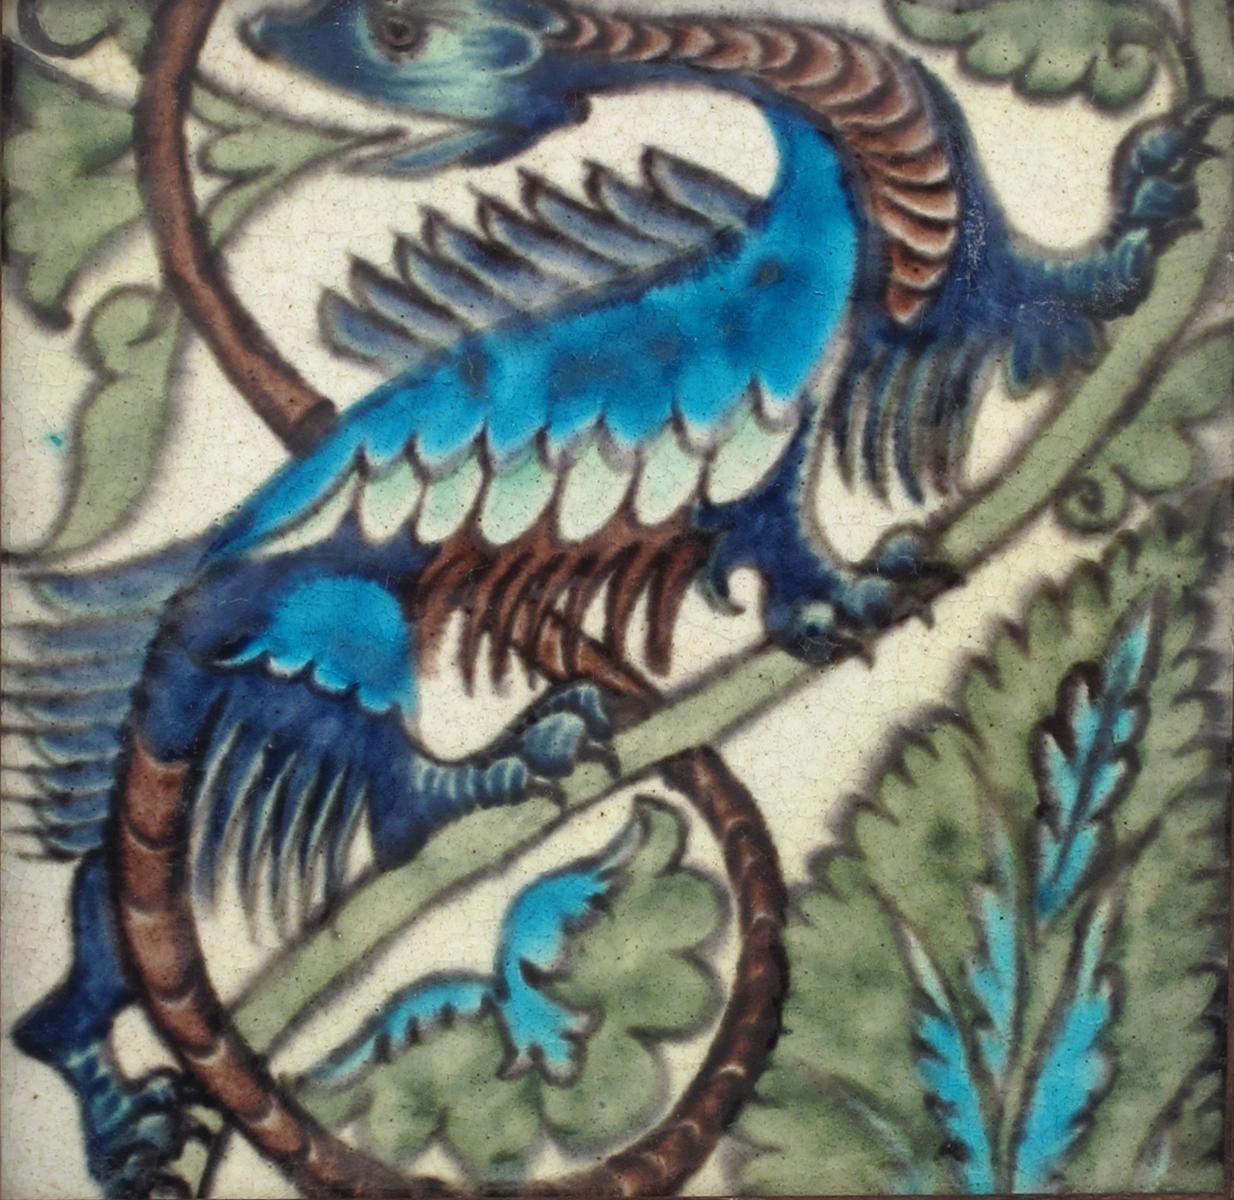 A William De Morgan Sand`s End Pottery tile, painted with a dragon-like creature in a Persian